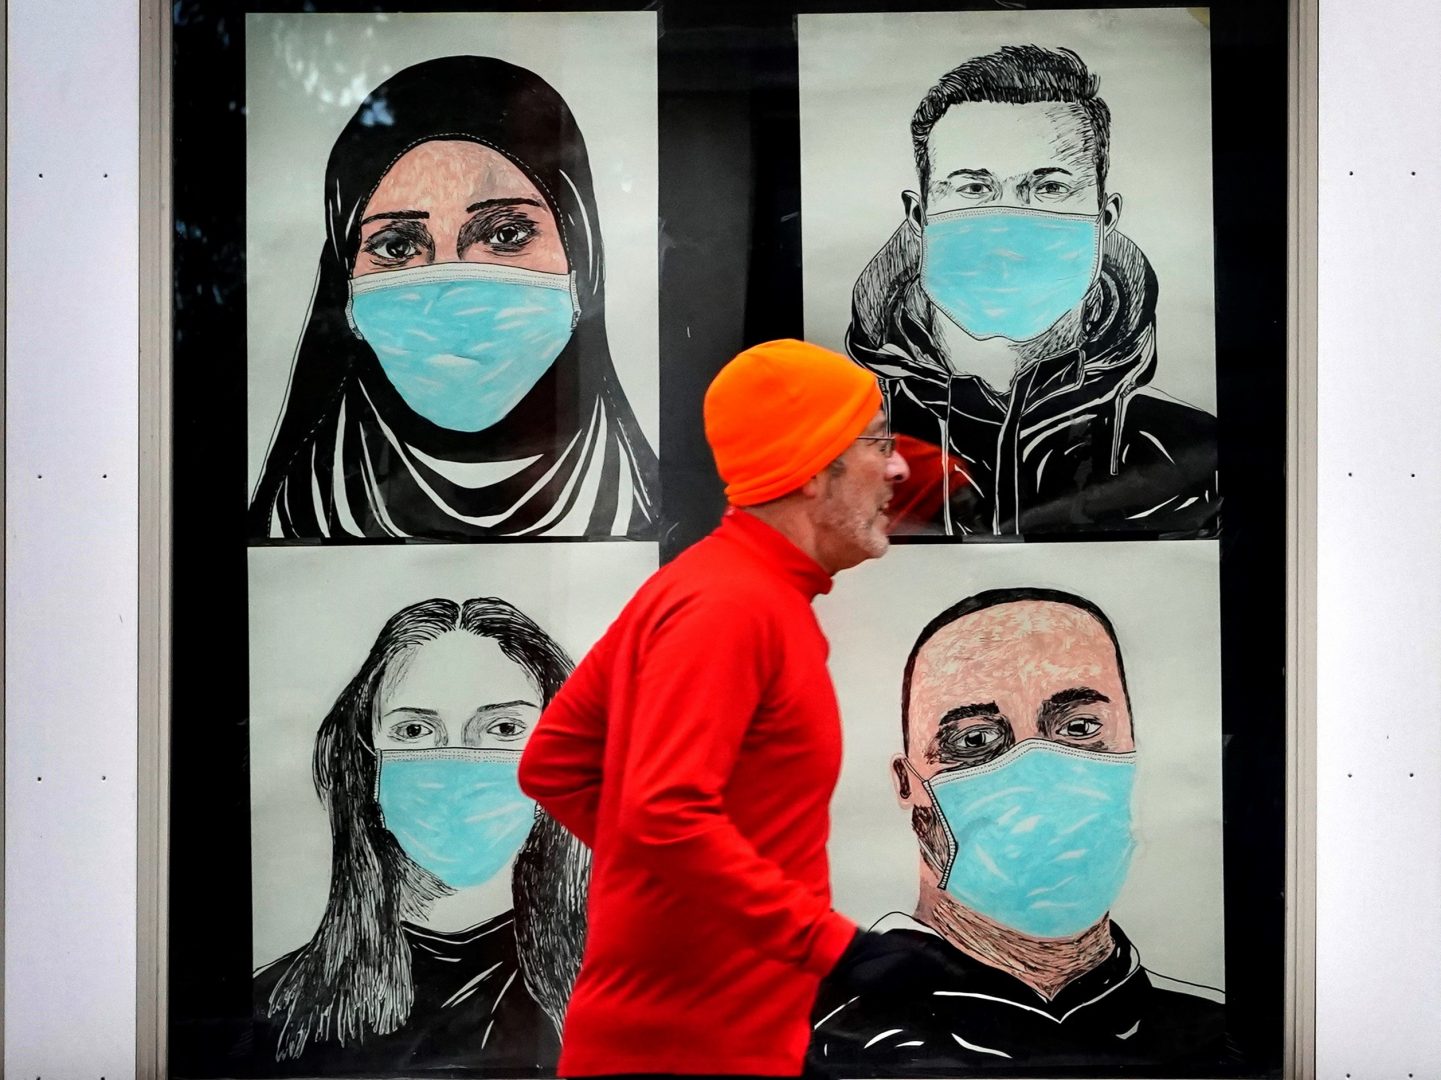 A runner passes by a window displaying portraits of people wearing face coverings to help prevent the spread of the coronavirus, Monday, Nov. 16, 2020, in Lewiston, Maine.